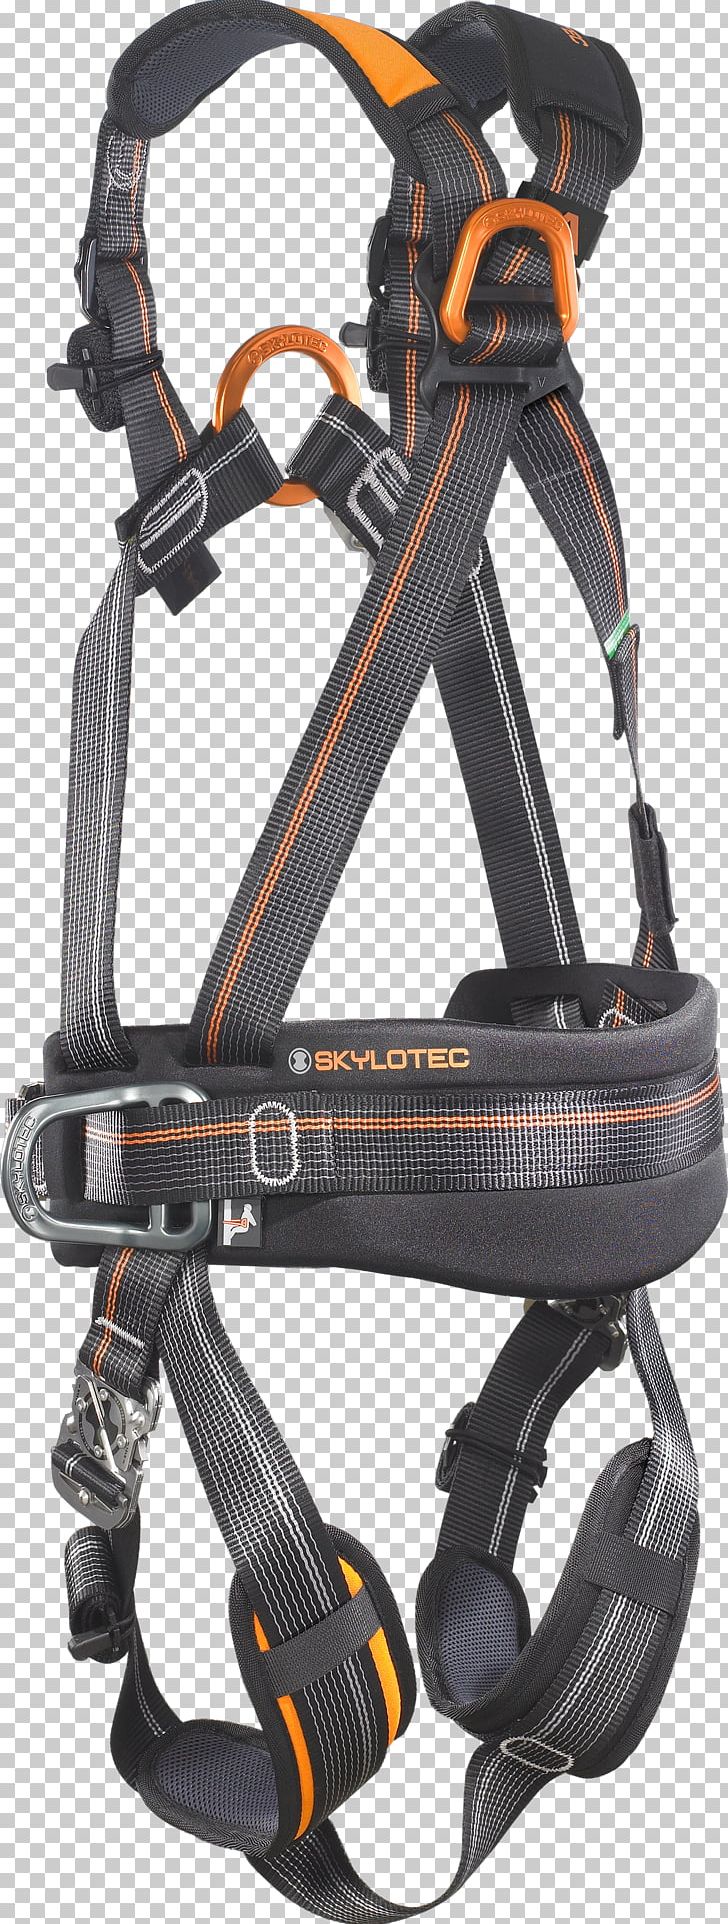 Climbing Harnesses Neuwied SKYLOTEC Safety Harness Personal Protective Equipment PNG, Clipart, Climbing, Climbing Harness, Climbing Harnesses, Dinnorm, Enstandard Free PNG Download